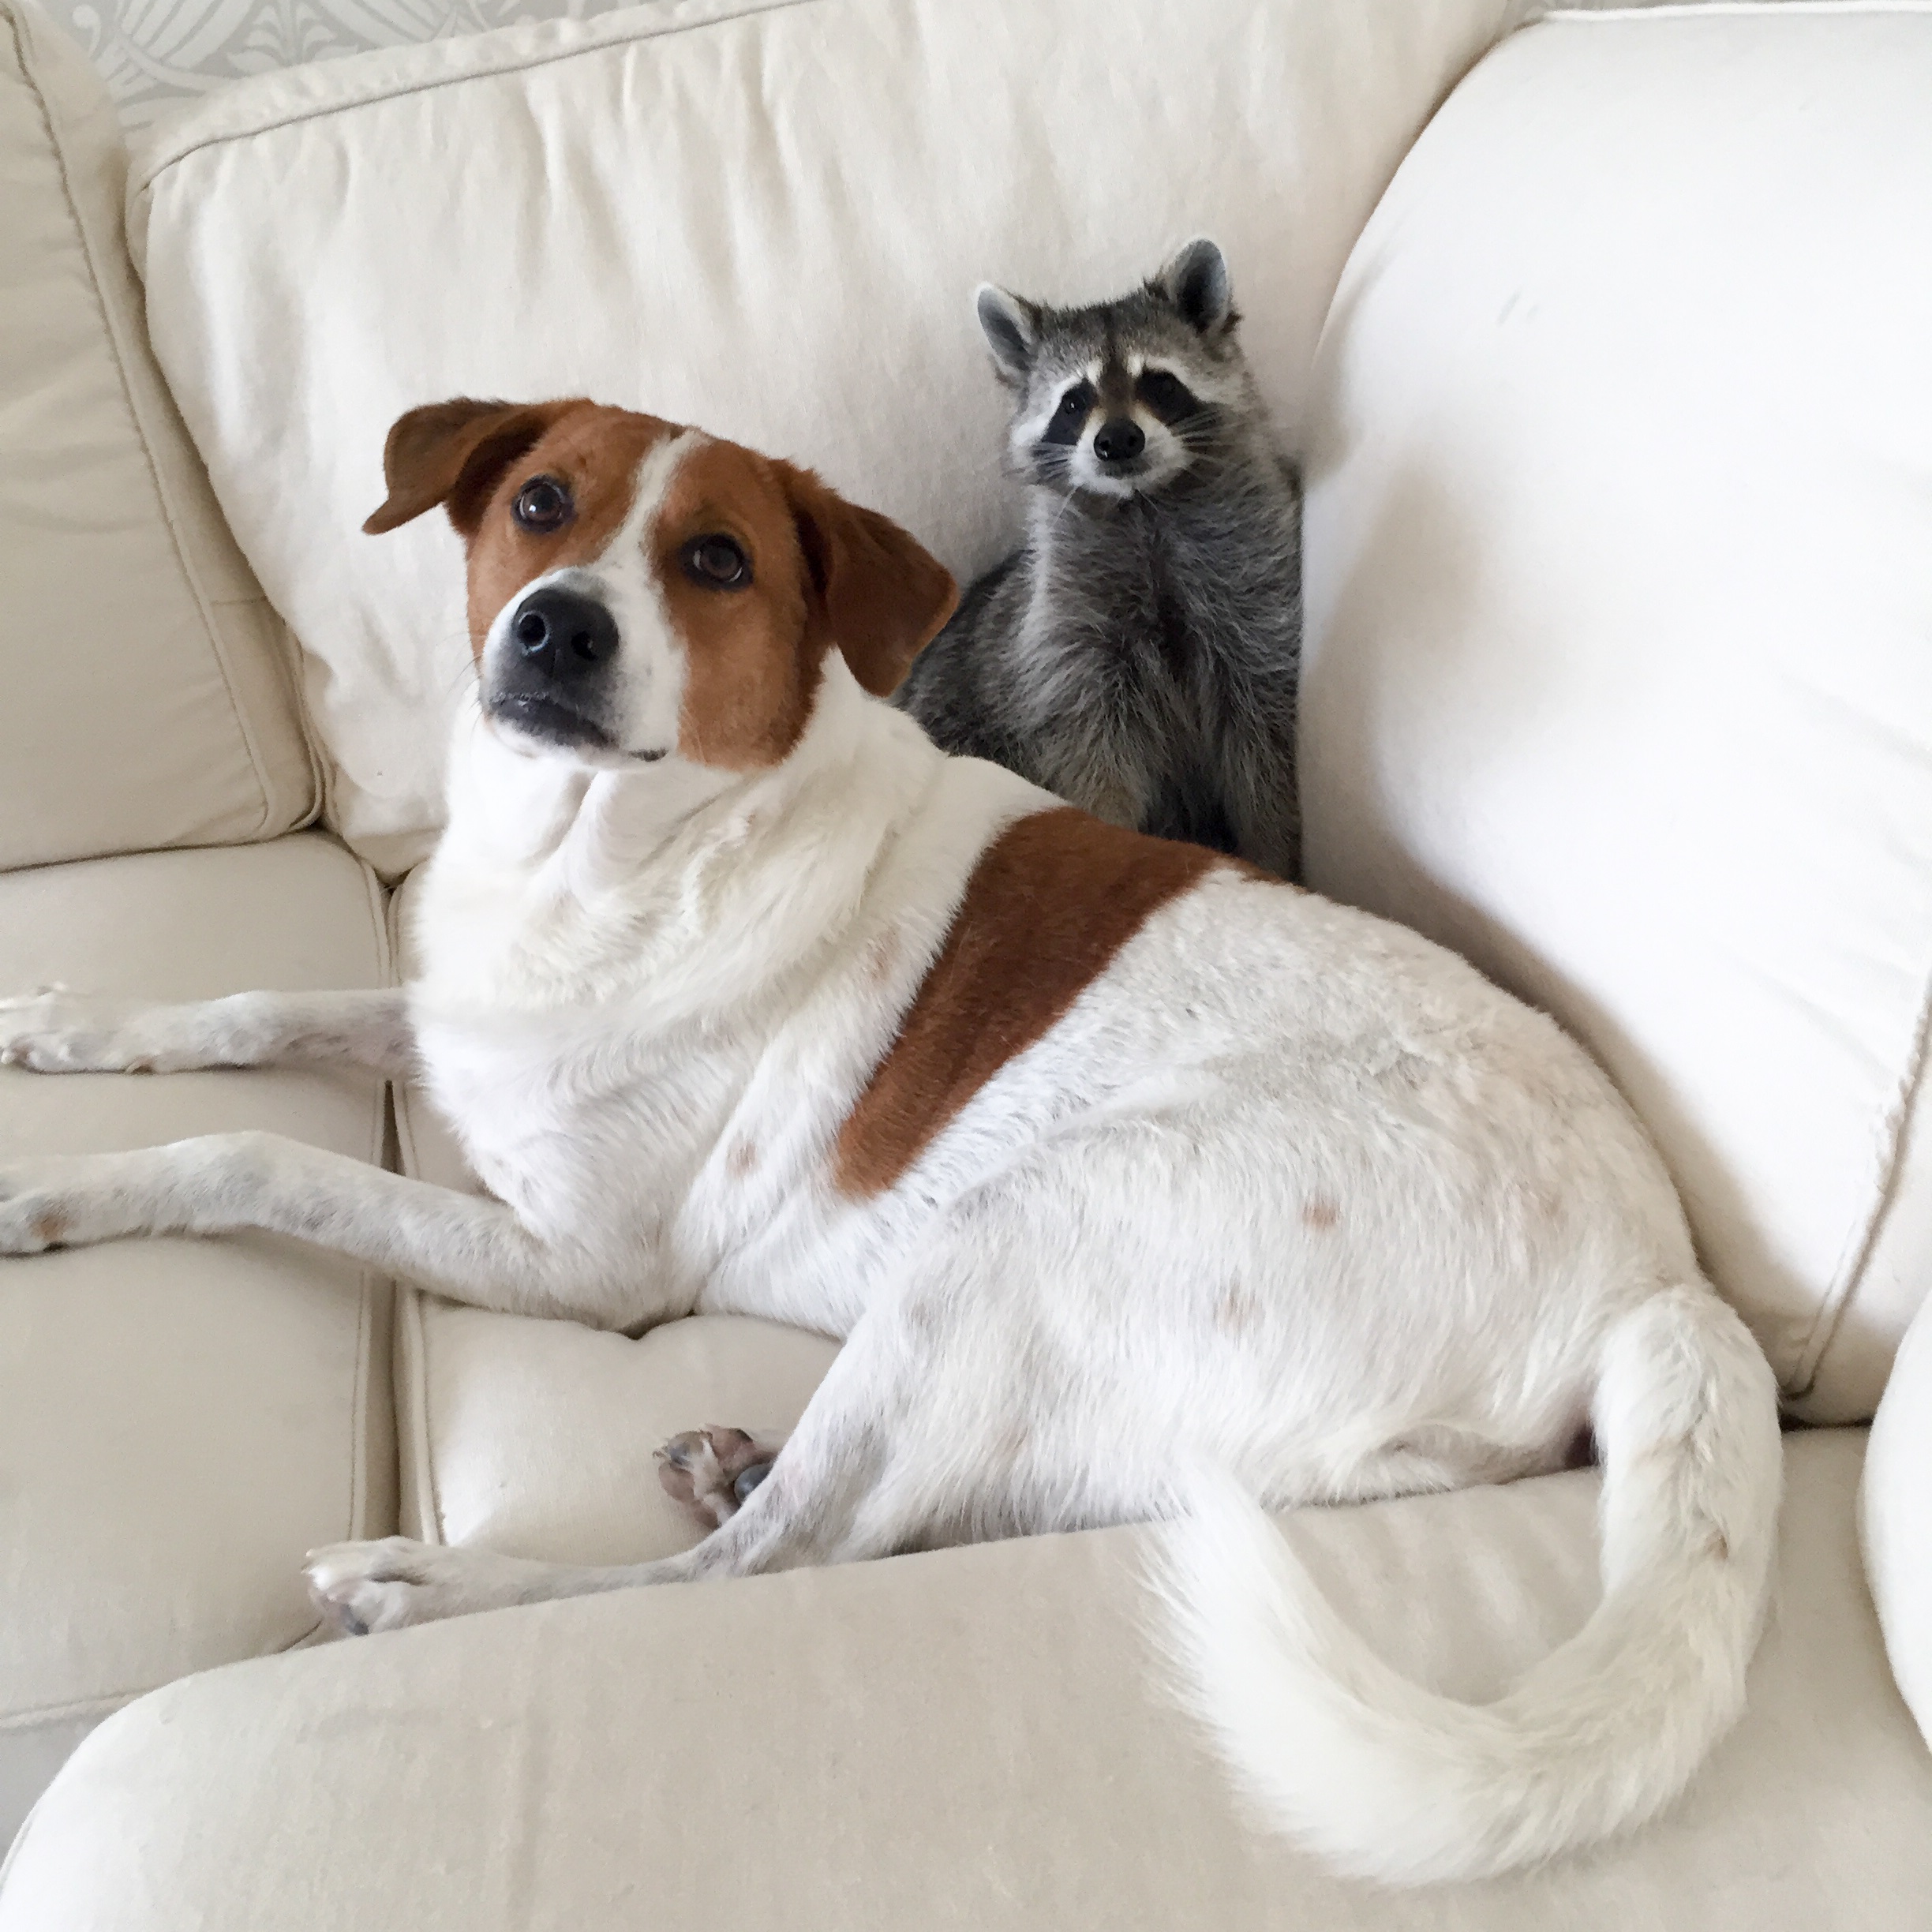 PHOTO: Pumpkin the Racoon lives in the Bahamas and thinks she's one of her owner's dogs.